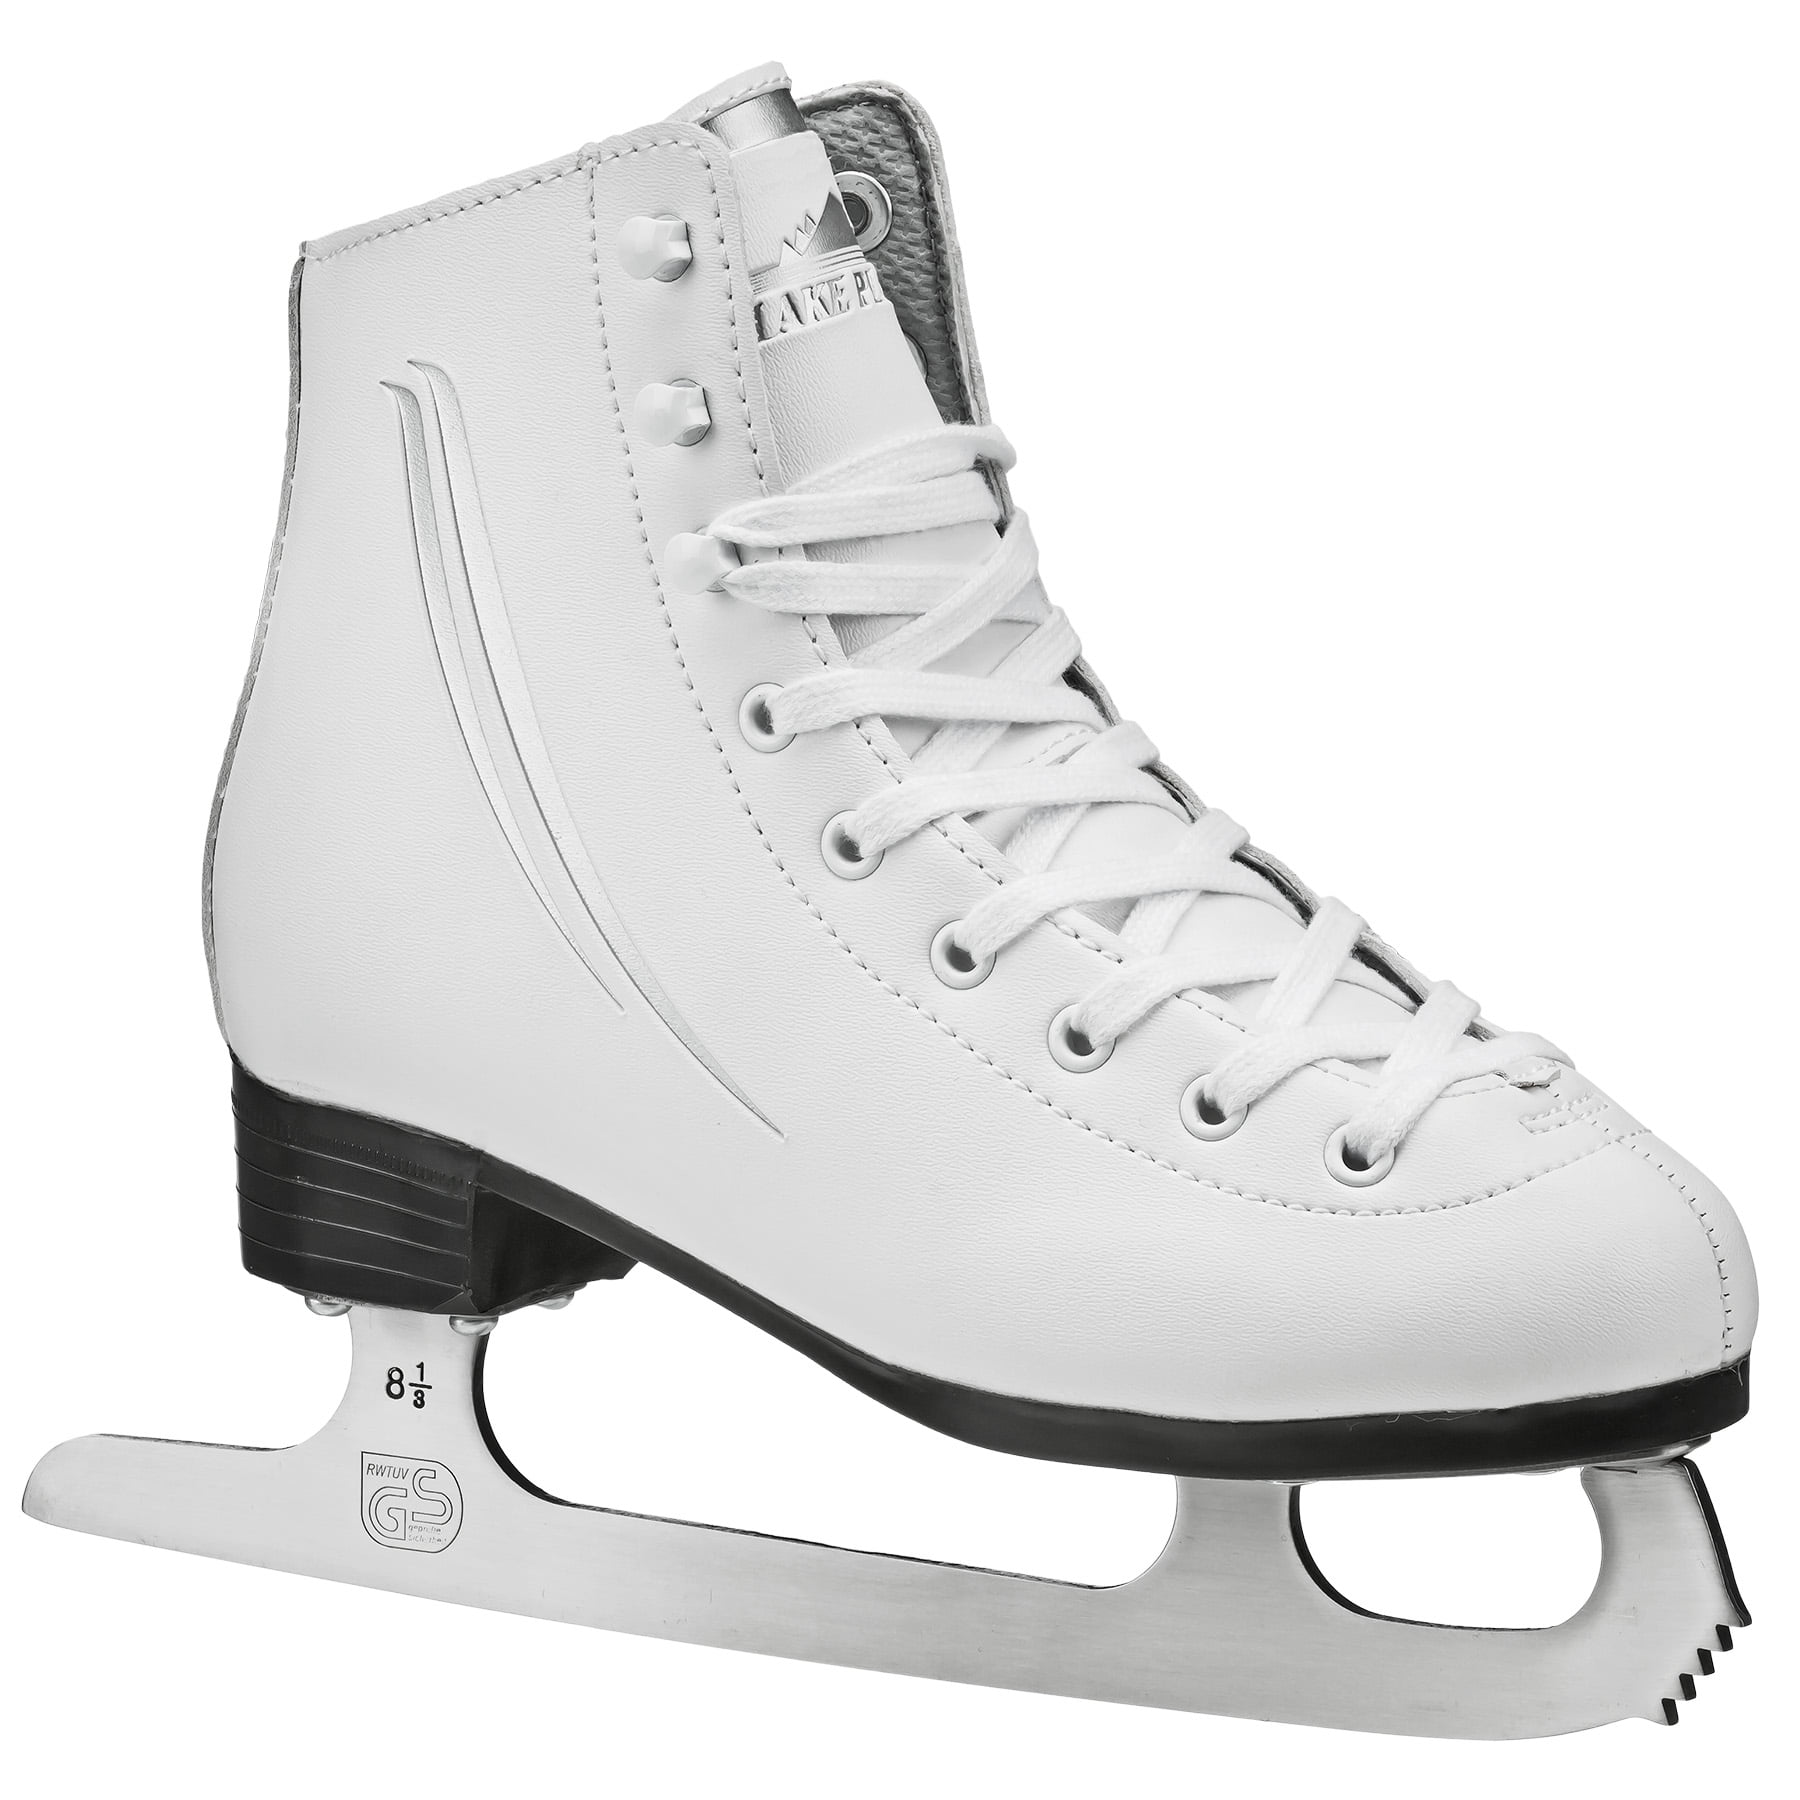 White American Athletic Shoe Girls Tricot Lined Ice Skates 